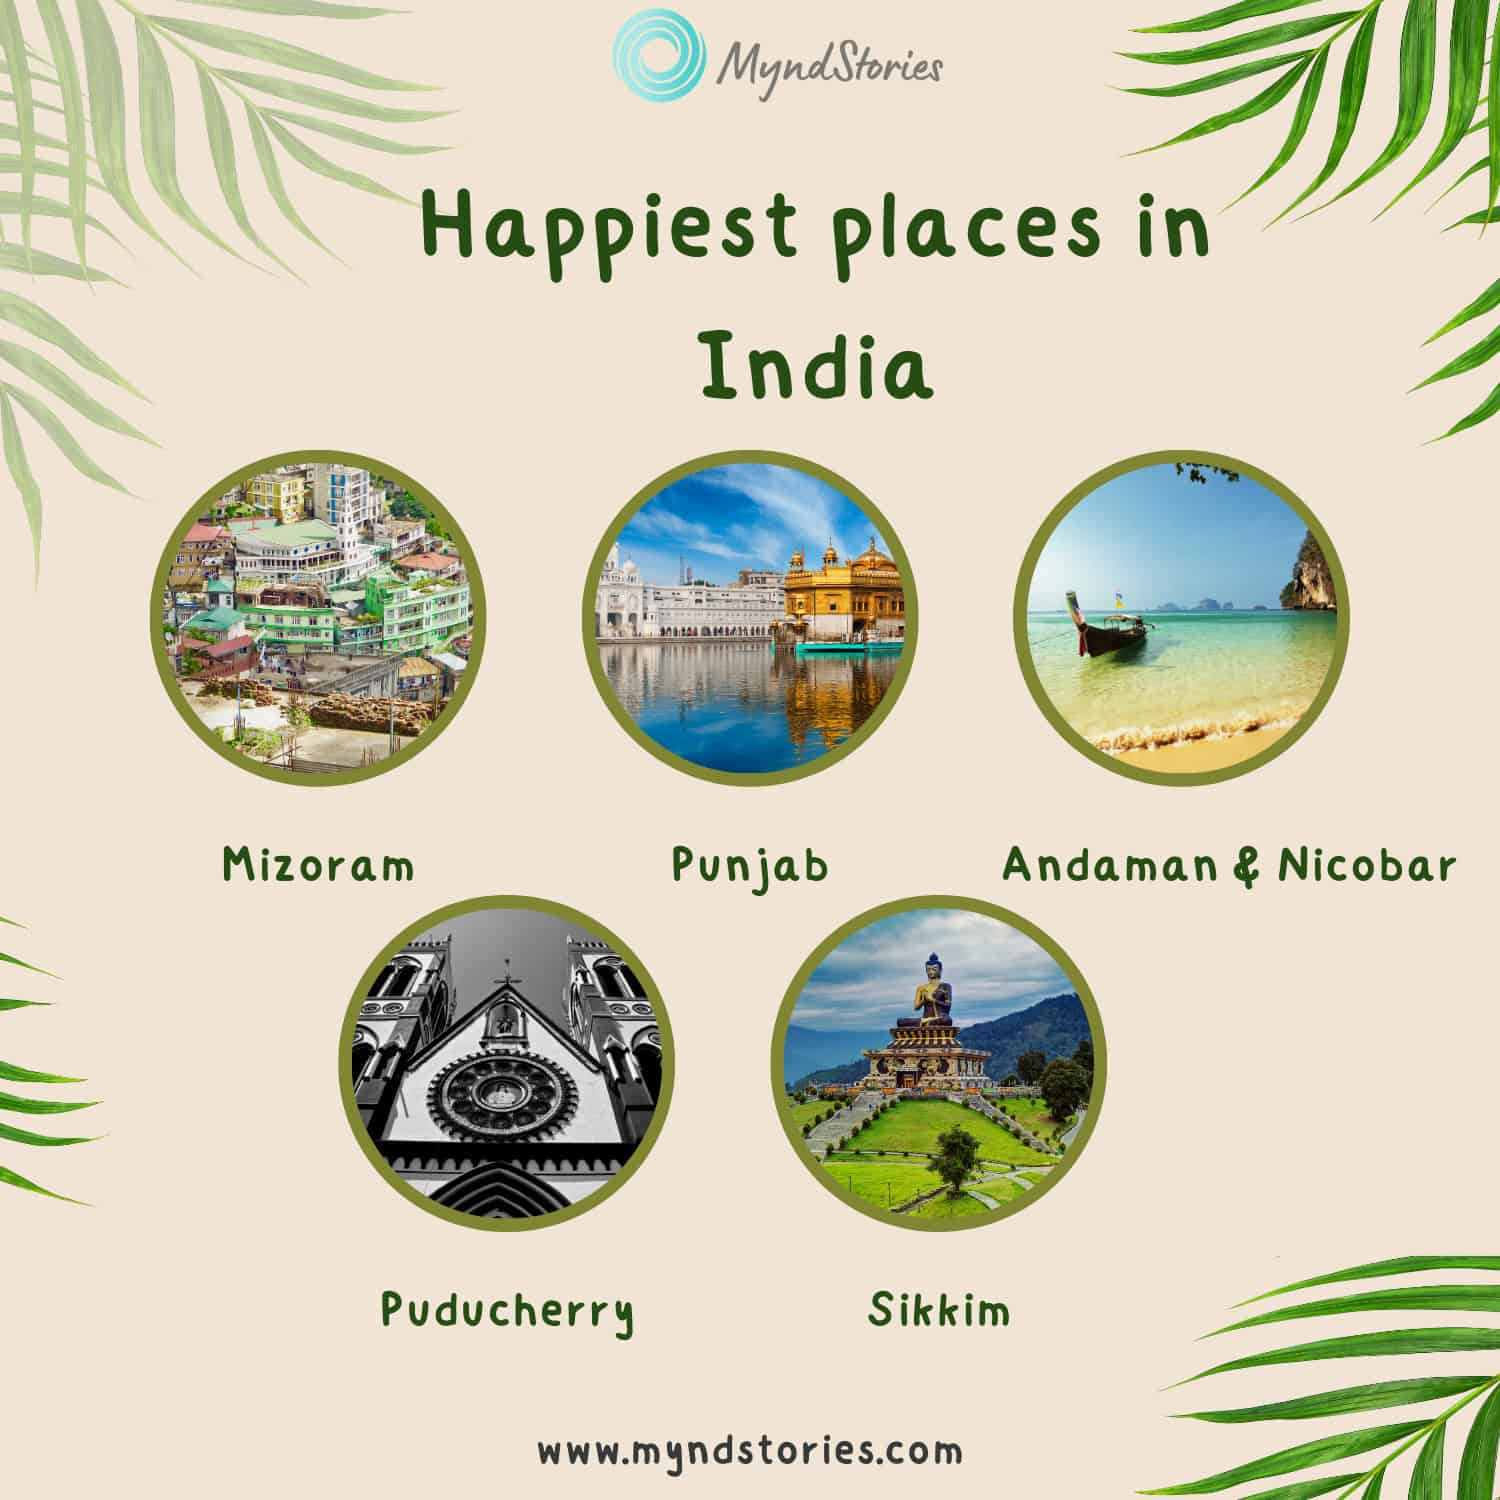 Mizoram is the happiest state in India